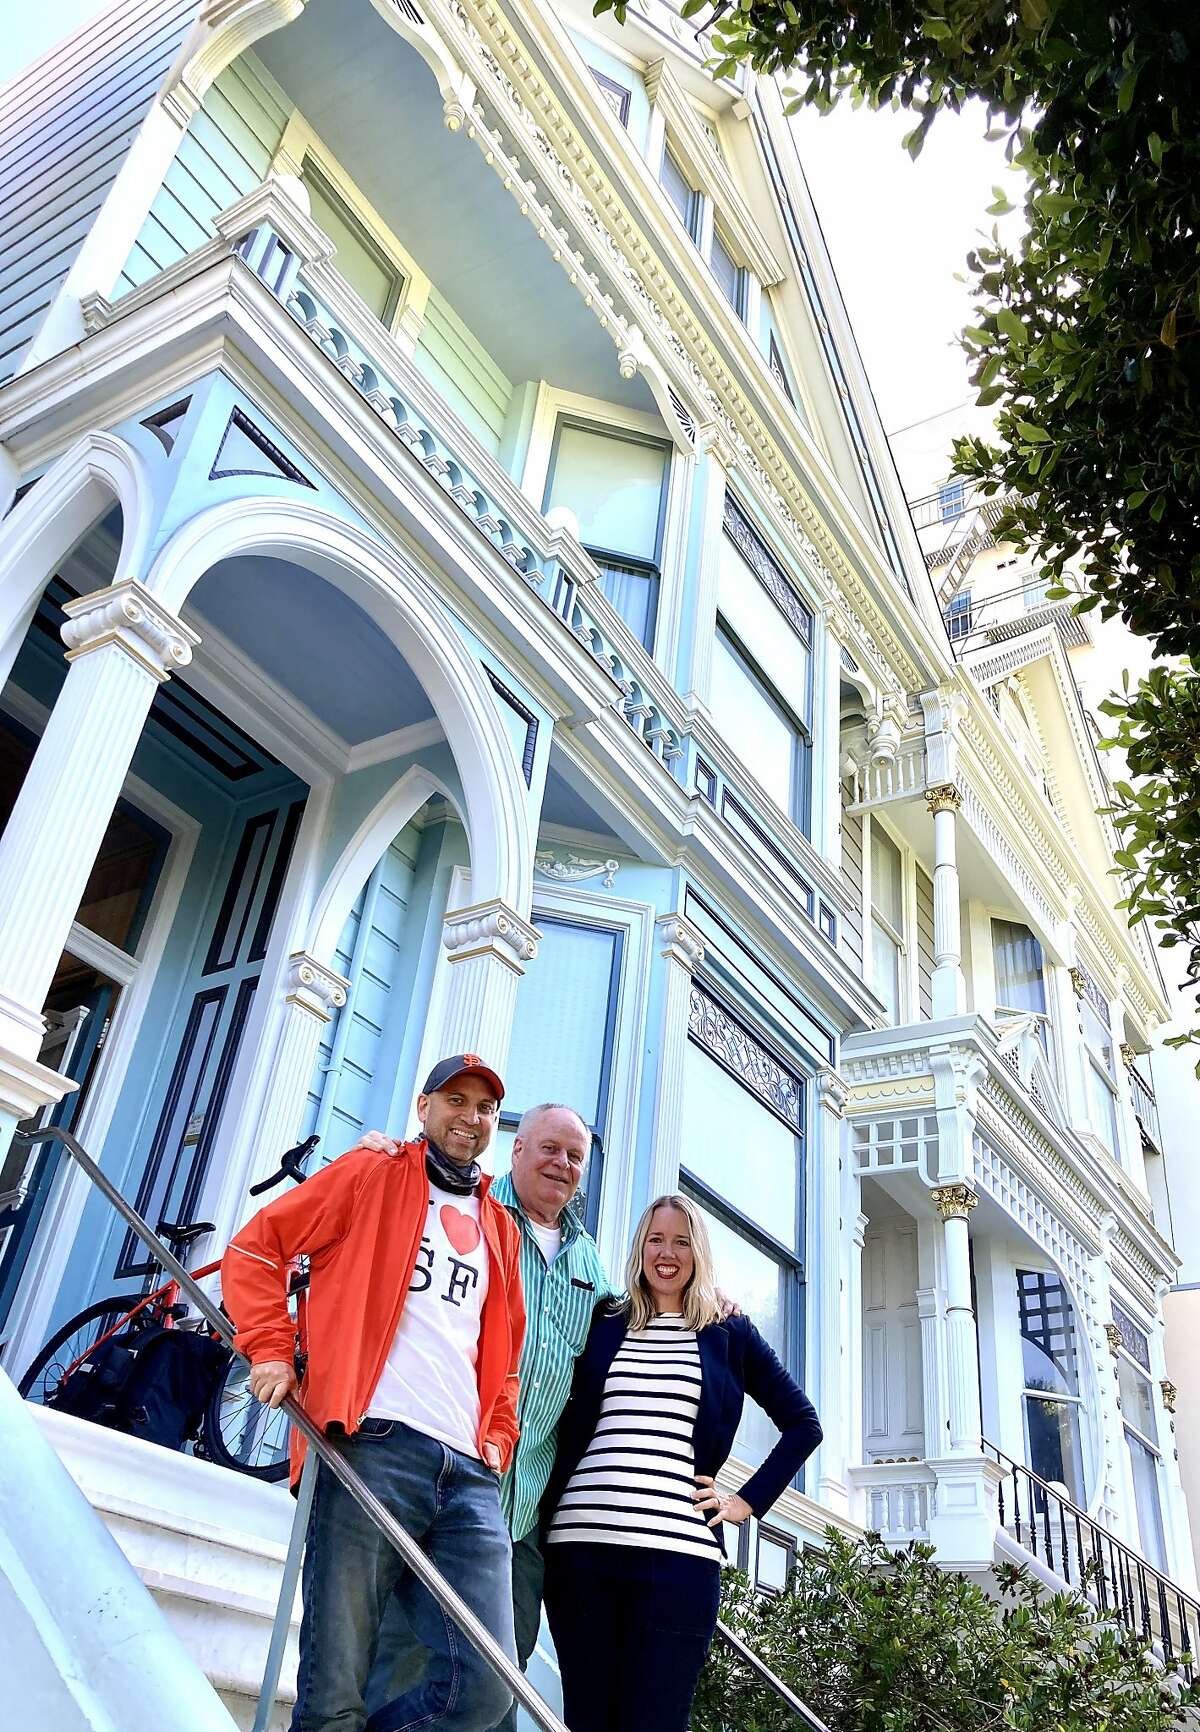 George Horsfall owns the Painted Ladies' blue house in San Francisco.  Peter Hartlaub and Heather Knight attended the podcast episode Total SF in September 2021.